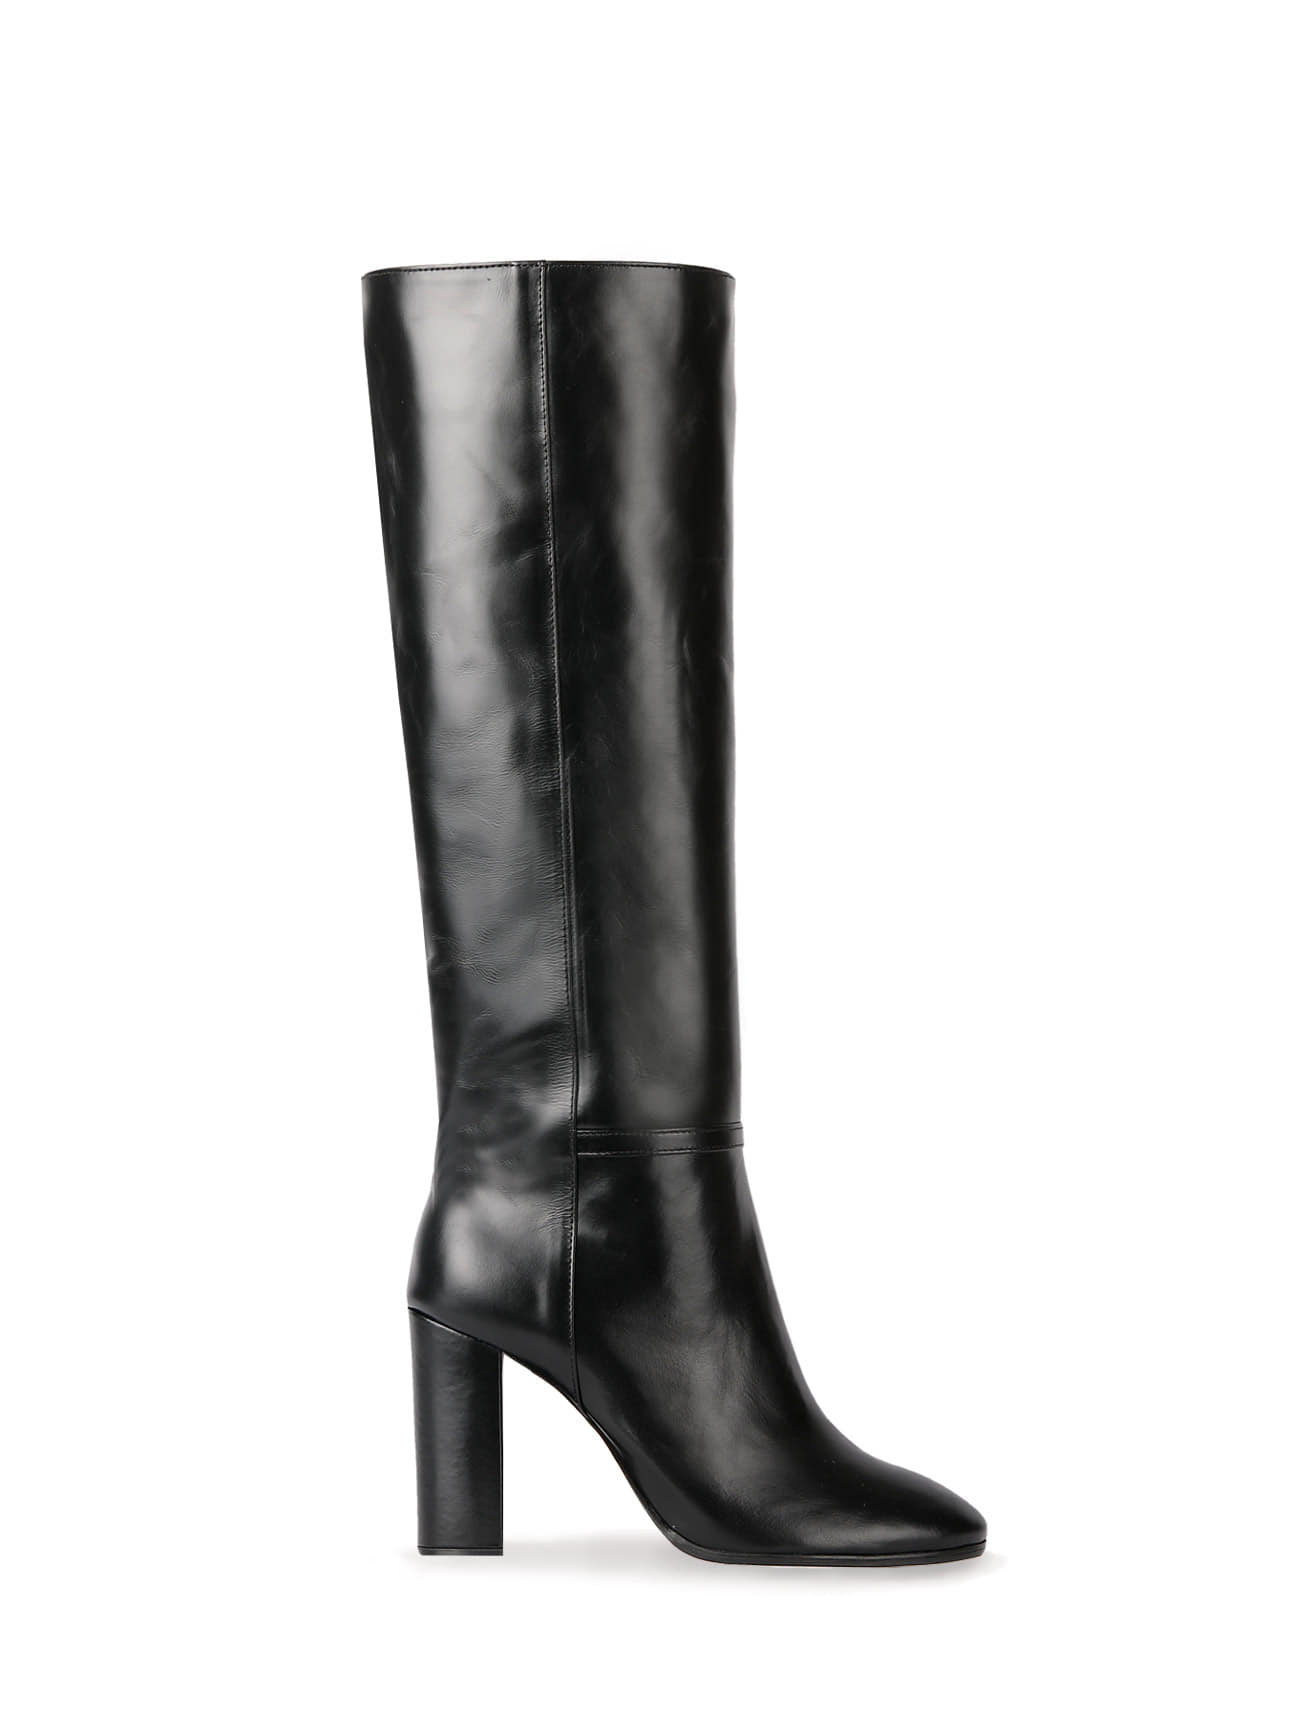 KATE LEATHER KNEE BOOTS - BLACK